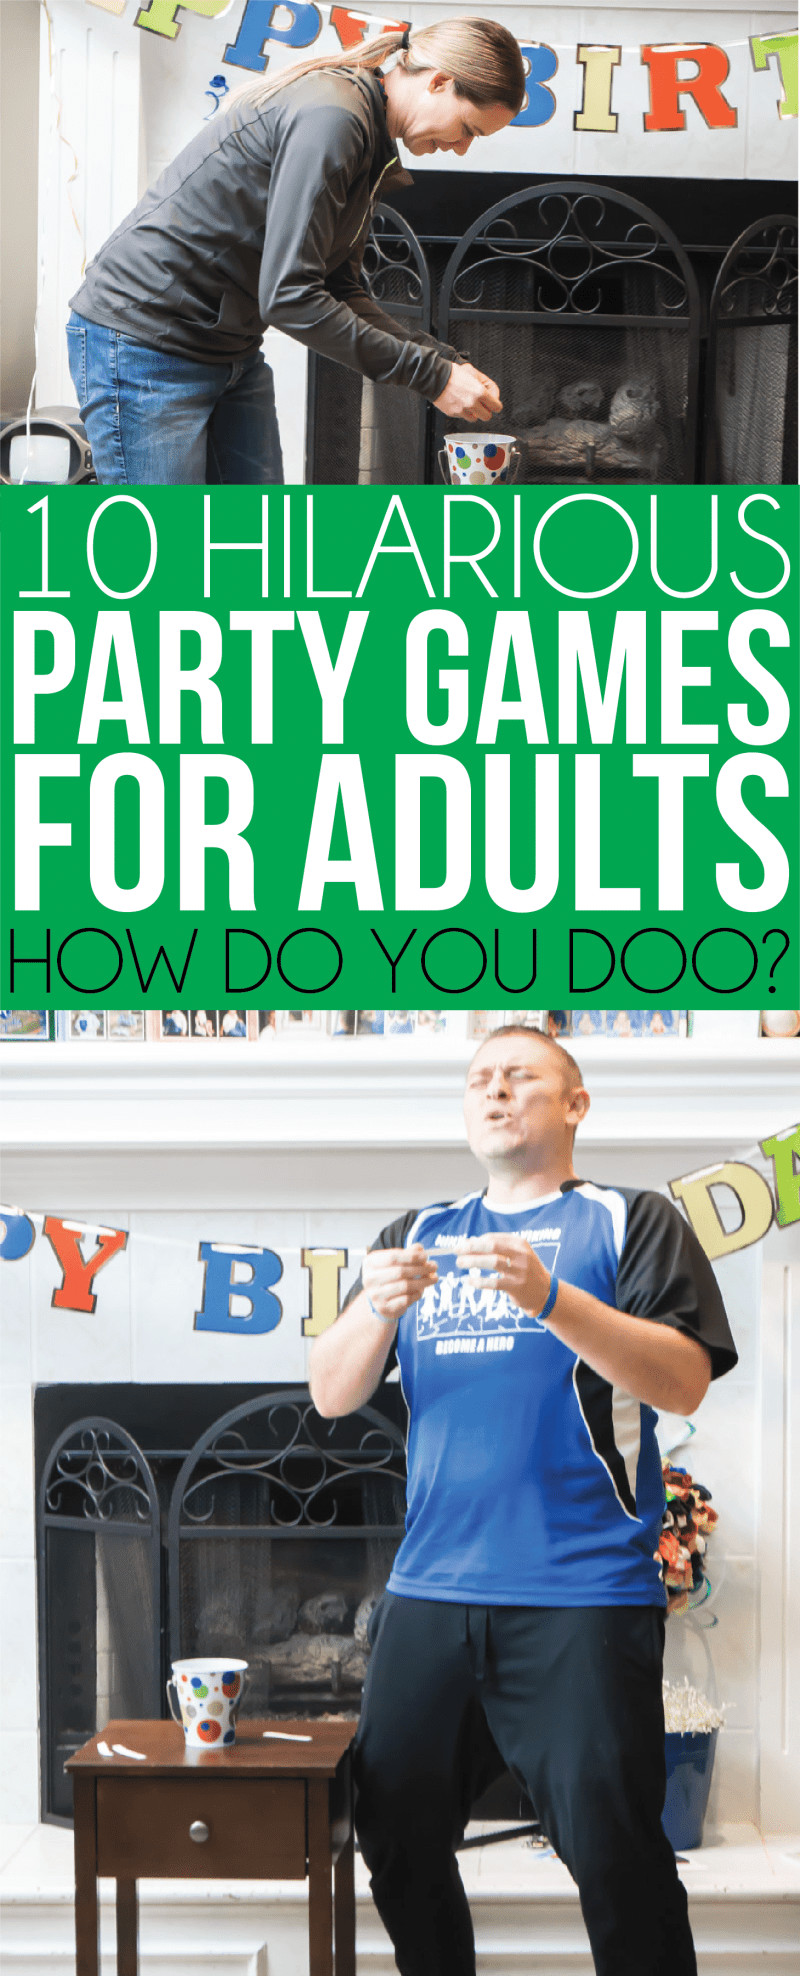 Fun Competition Ideas For Adults
 10 Hilarious Party Games for Adults that You ve Probably